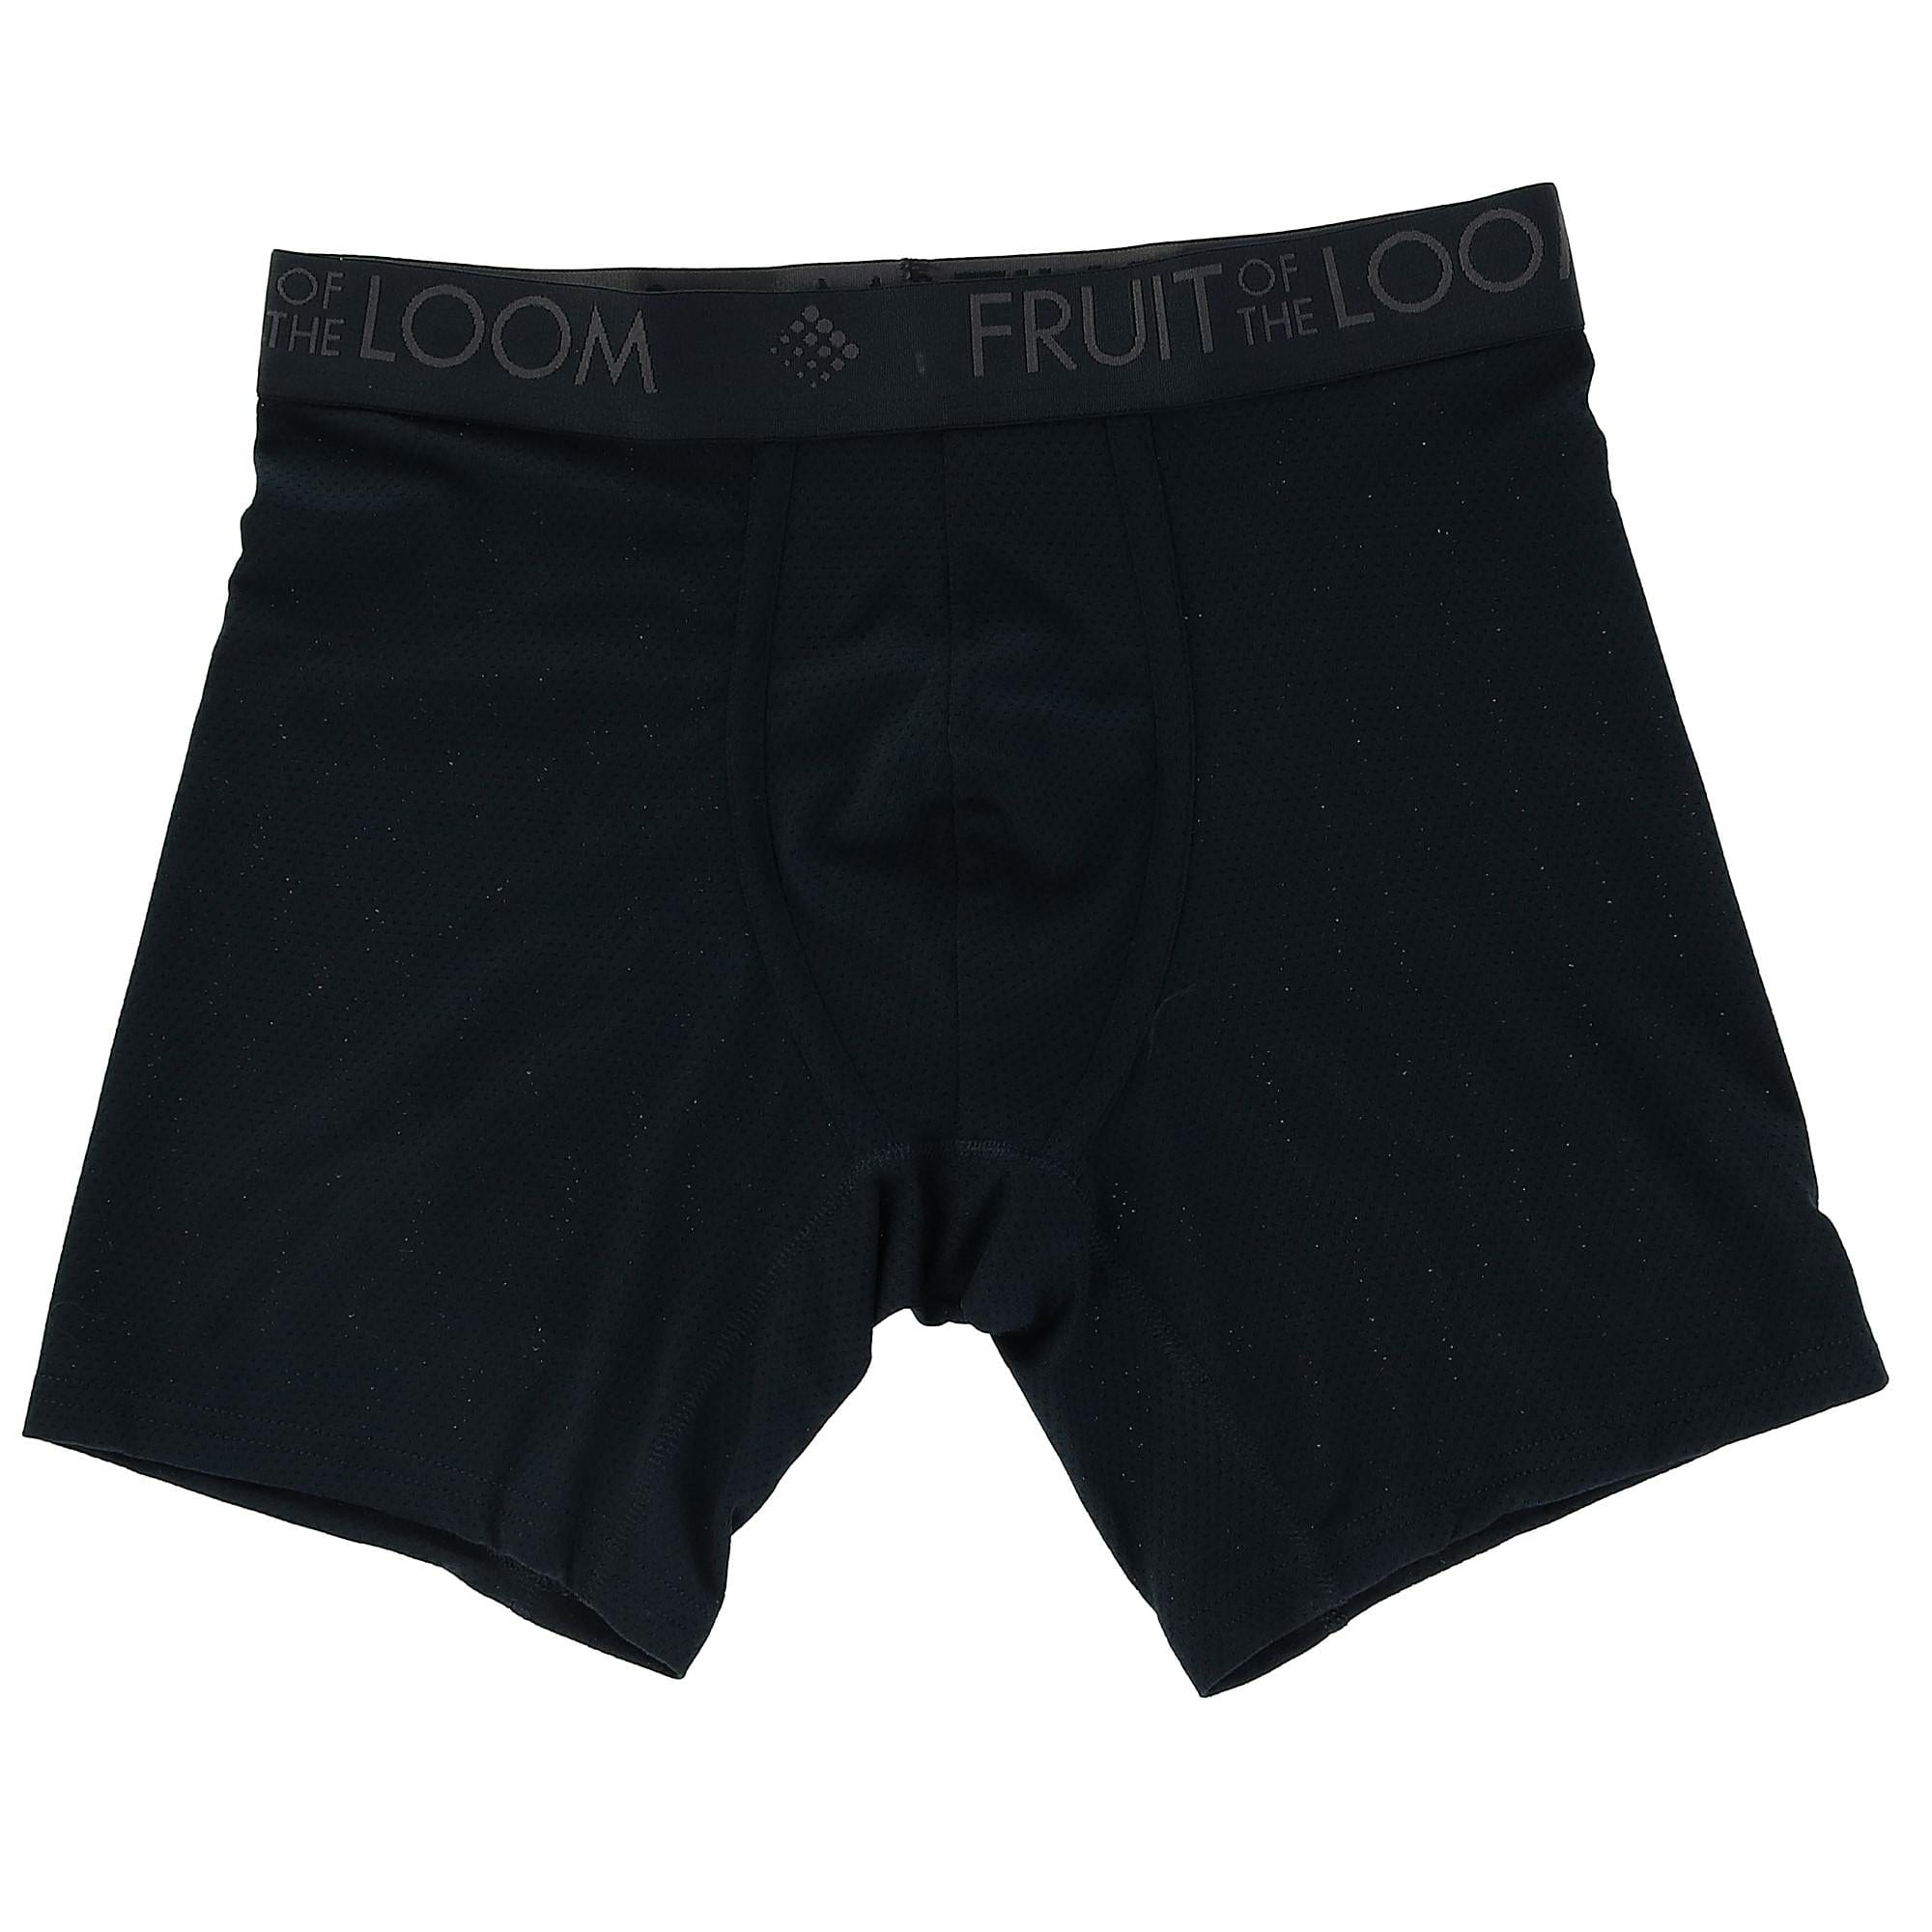 Men's Fruit of the Loom® Breathable Micro-Mesh 4-pack Assorted